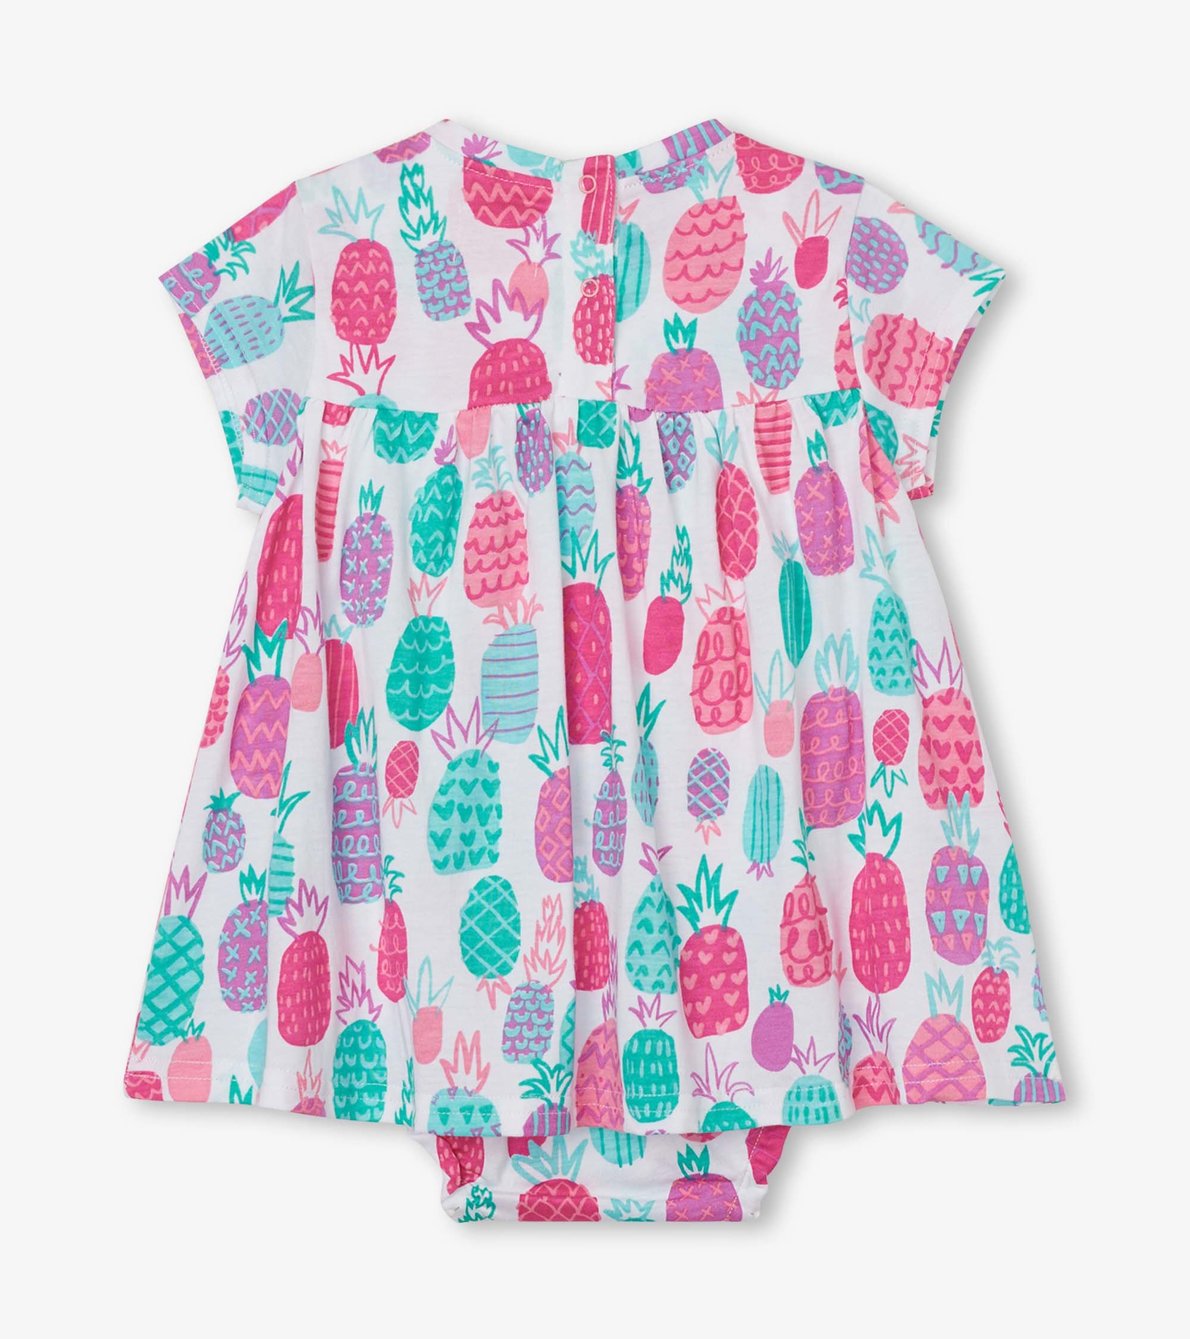 View larger image of Pineapple Doodles Baby One-Piece Dress